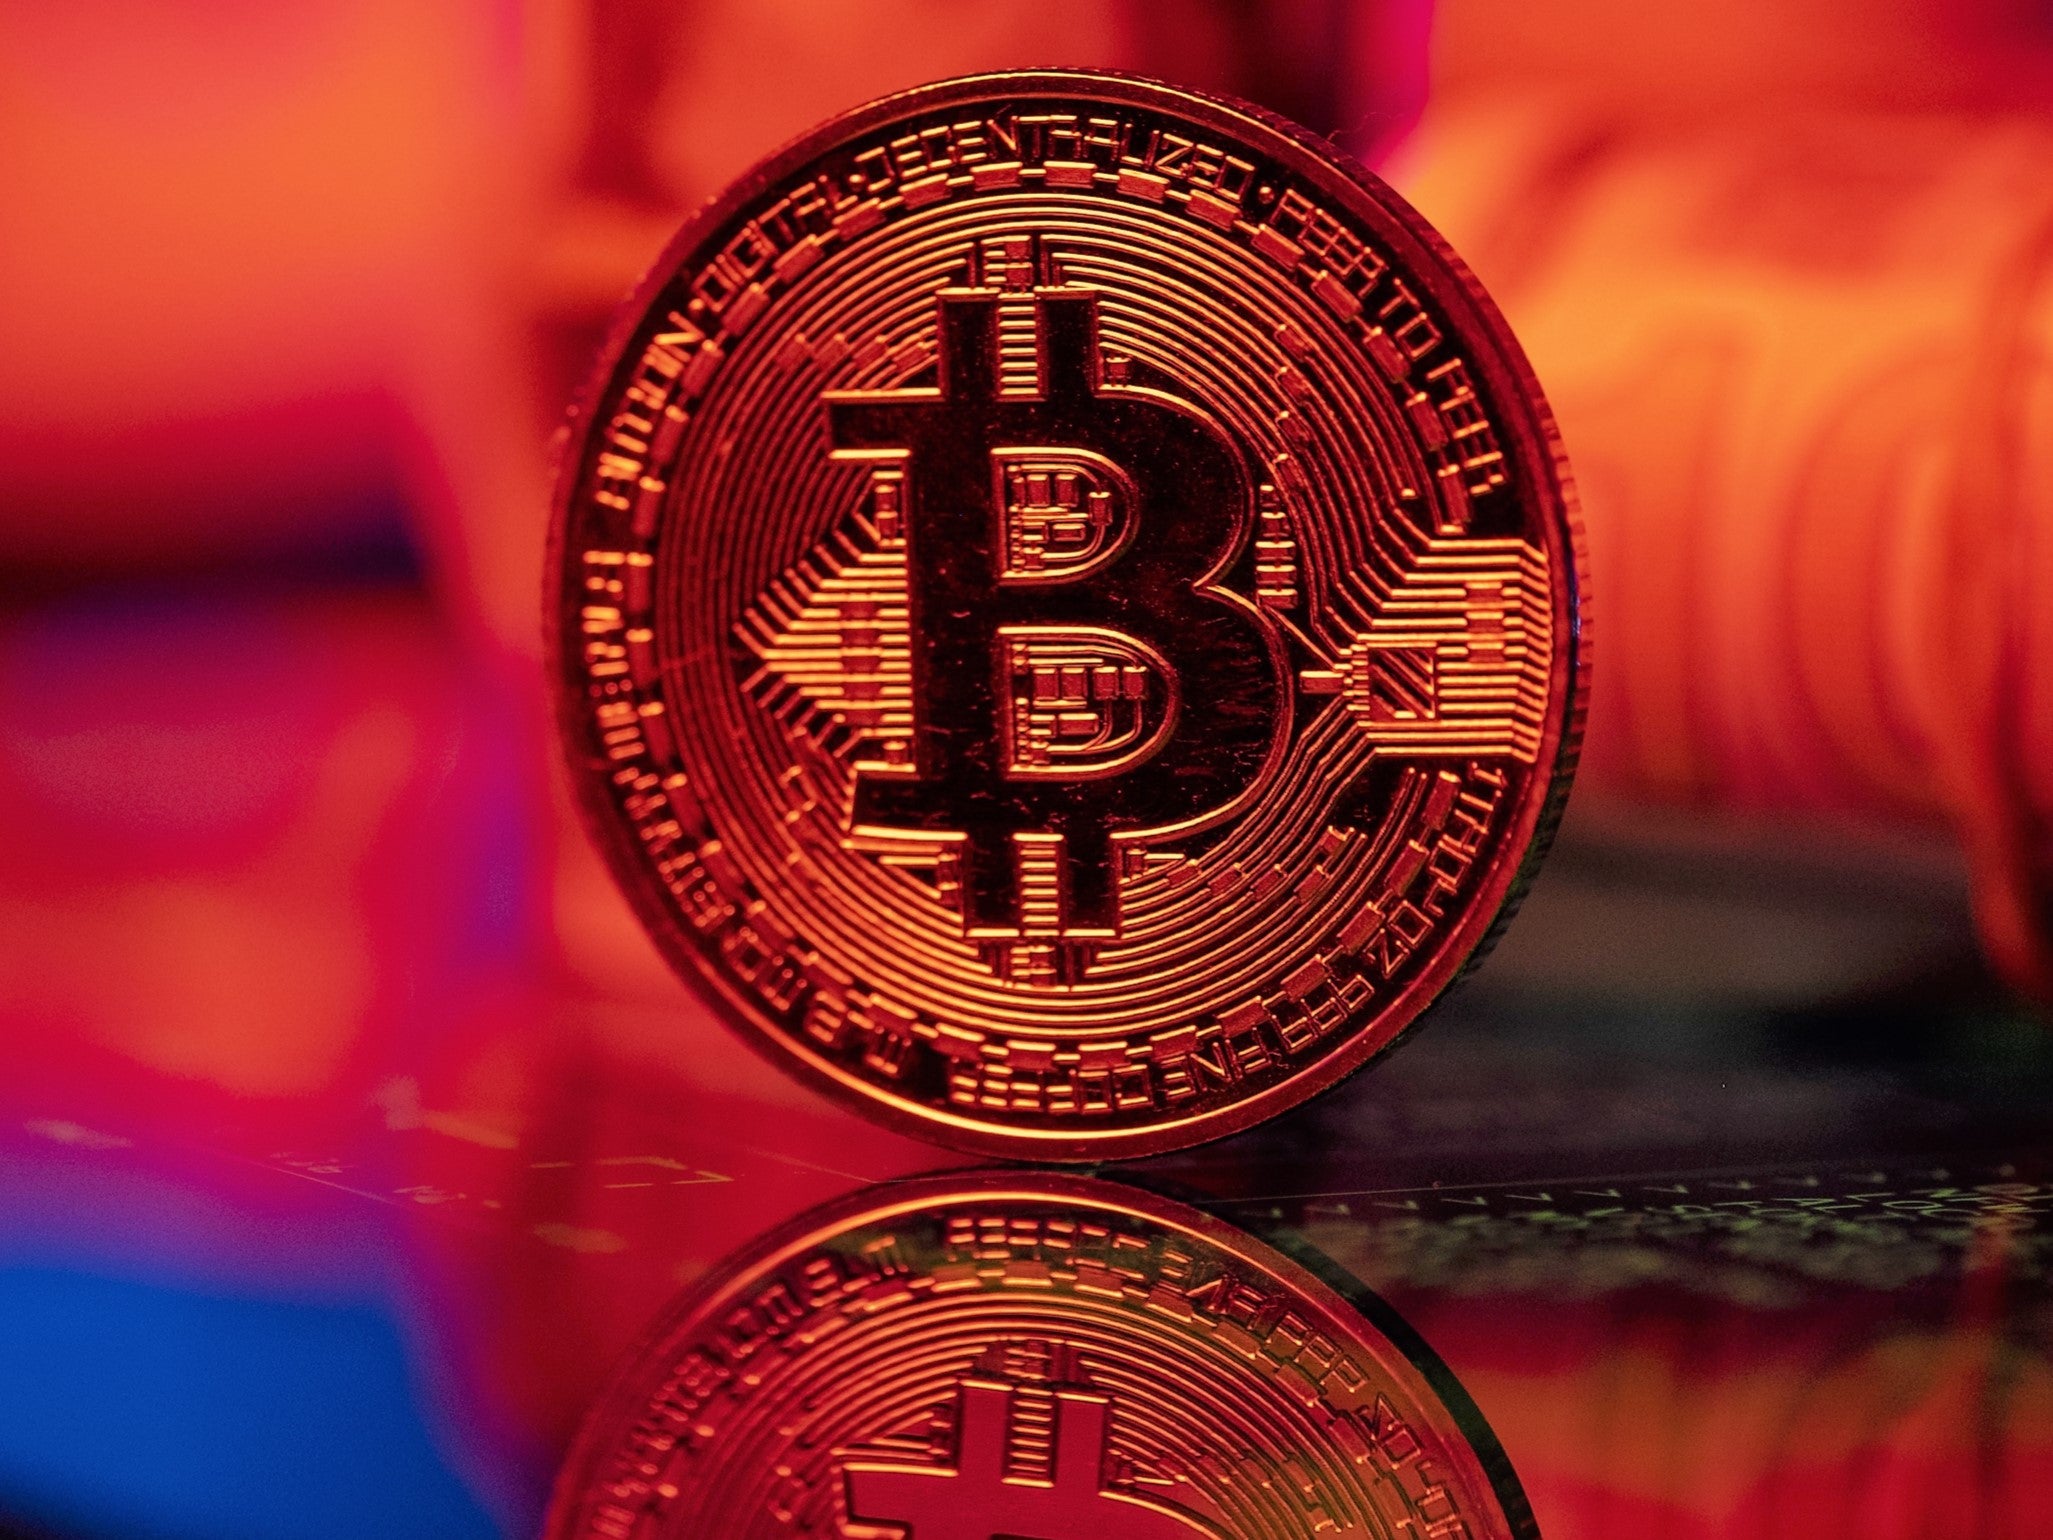 China’s crackdown on bitcoin in 2021 appeared to spark a major crypto crash that the market is only just beginning to recover from